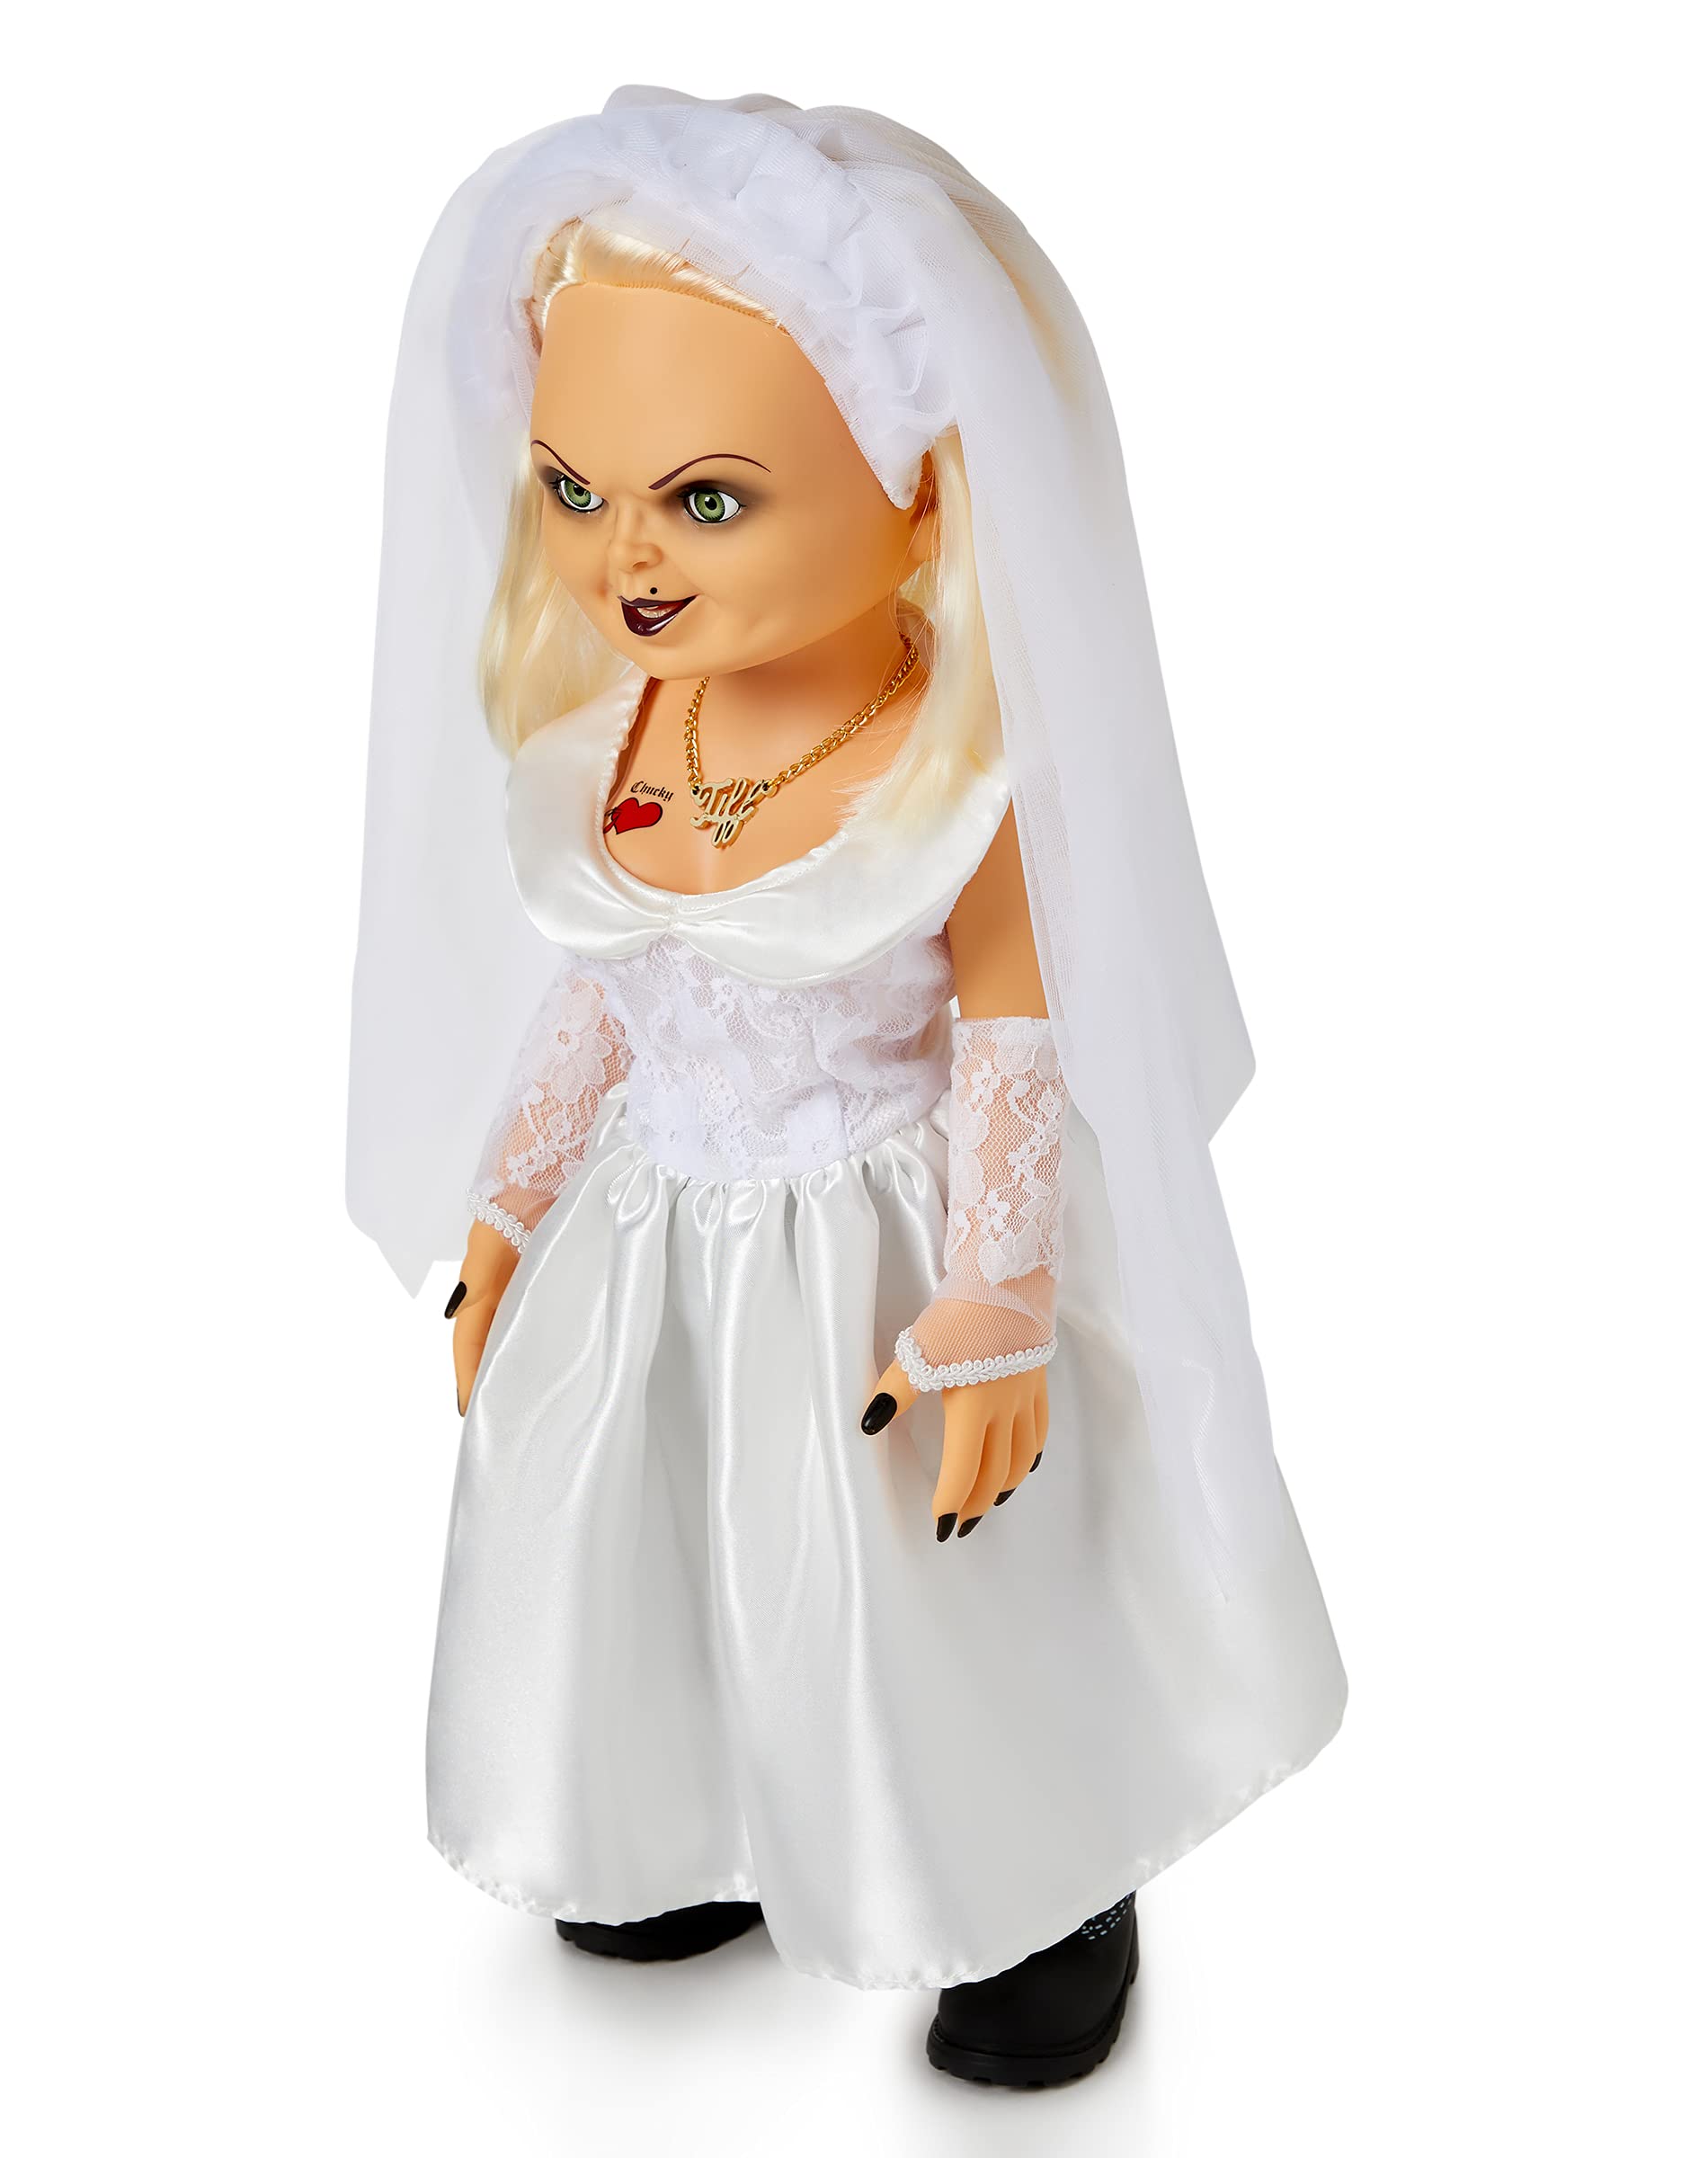 Spirit Halloween Bride of Chucky Tiffany Doll Officially Licensed.